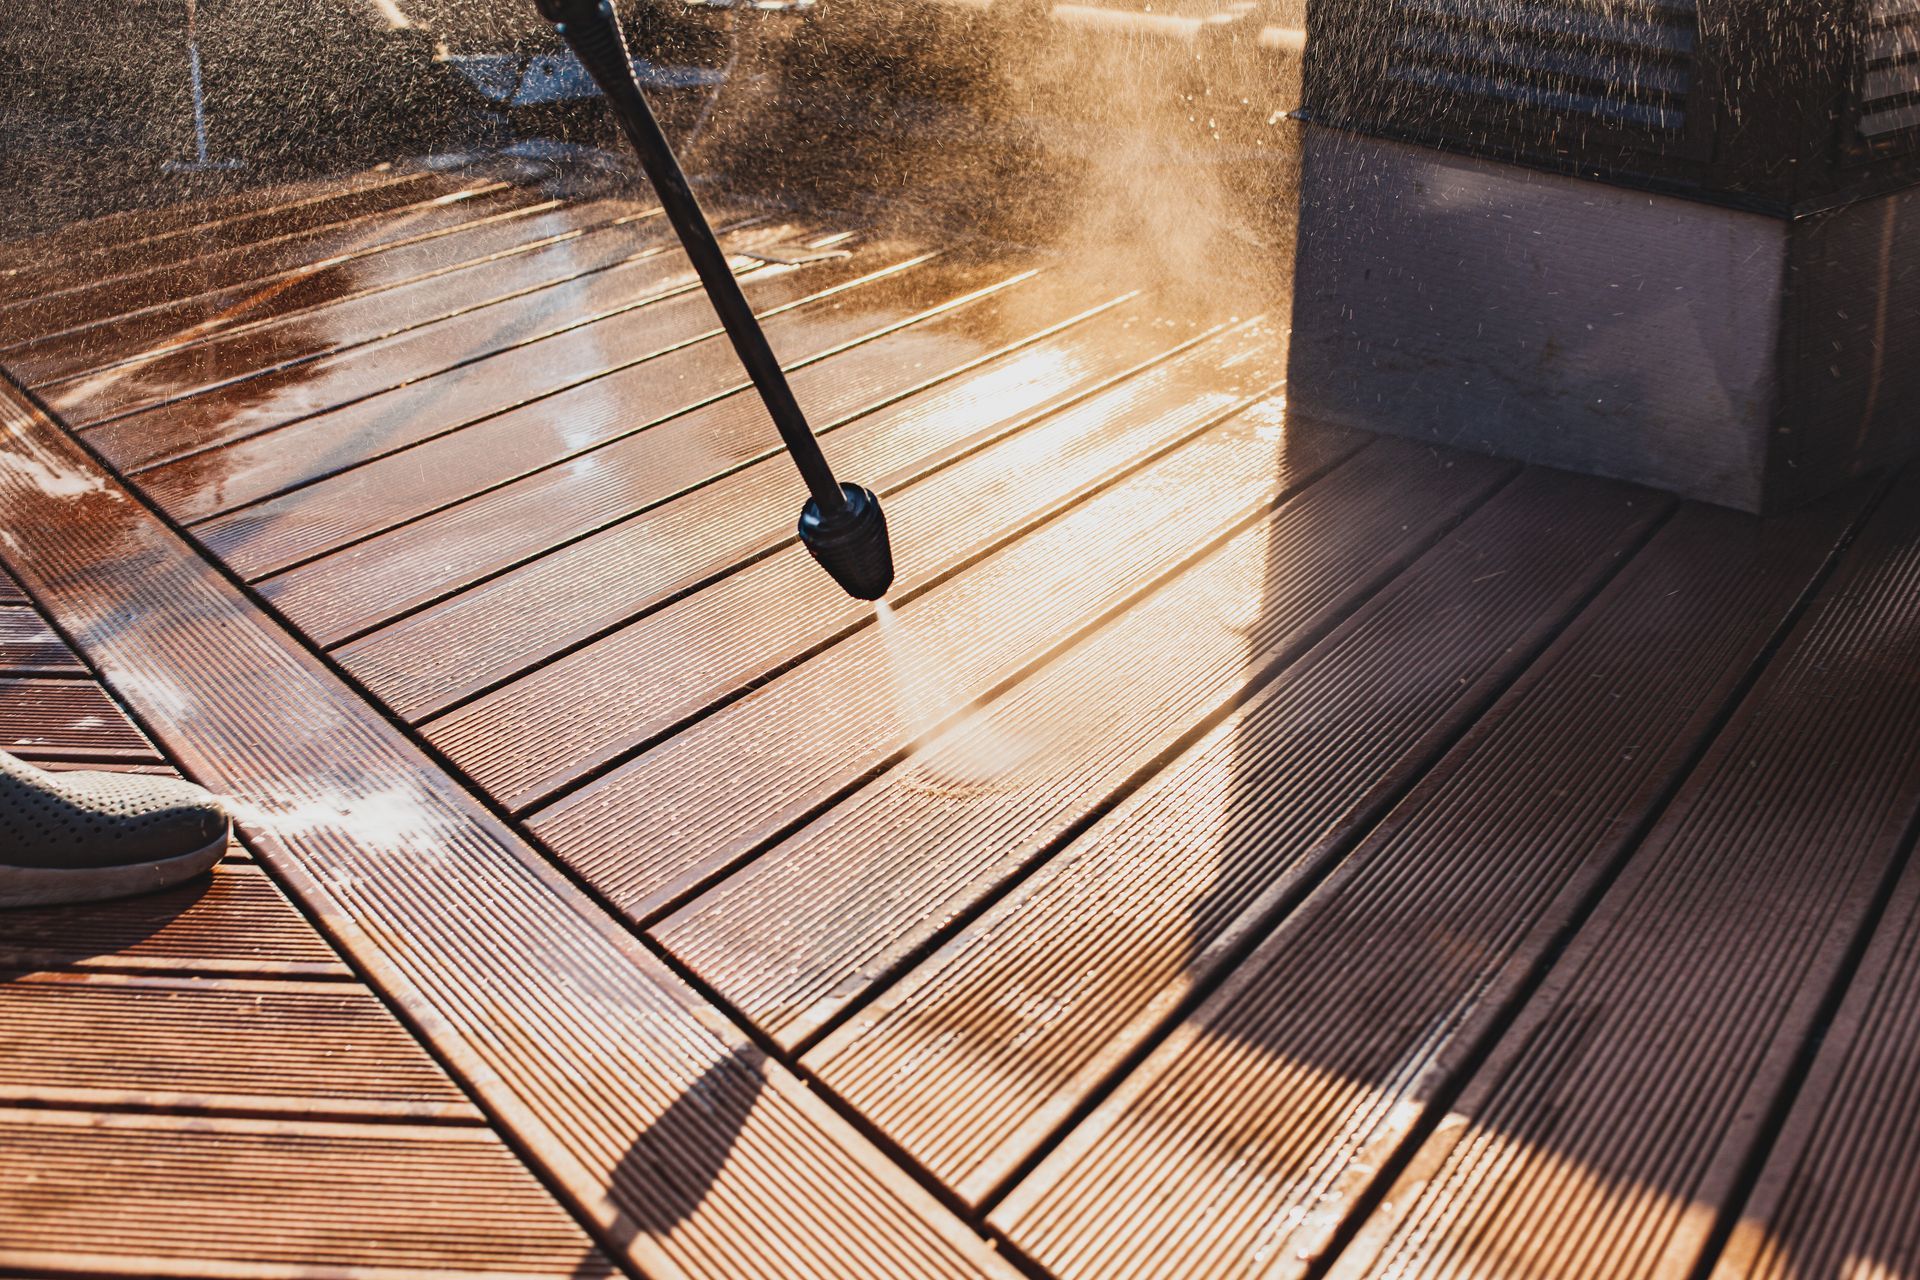 A man uses a power washer with high water pressure to clean a wooden terrace surface.